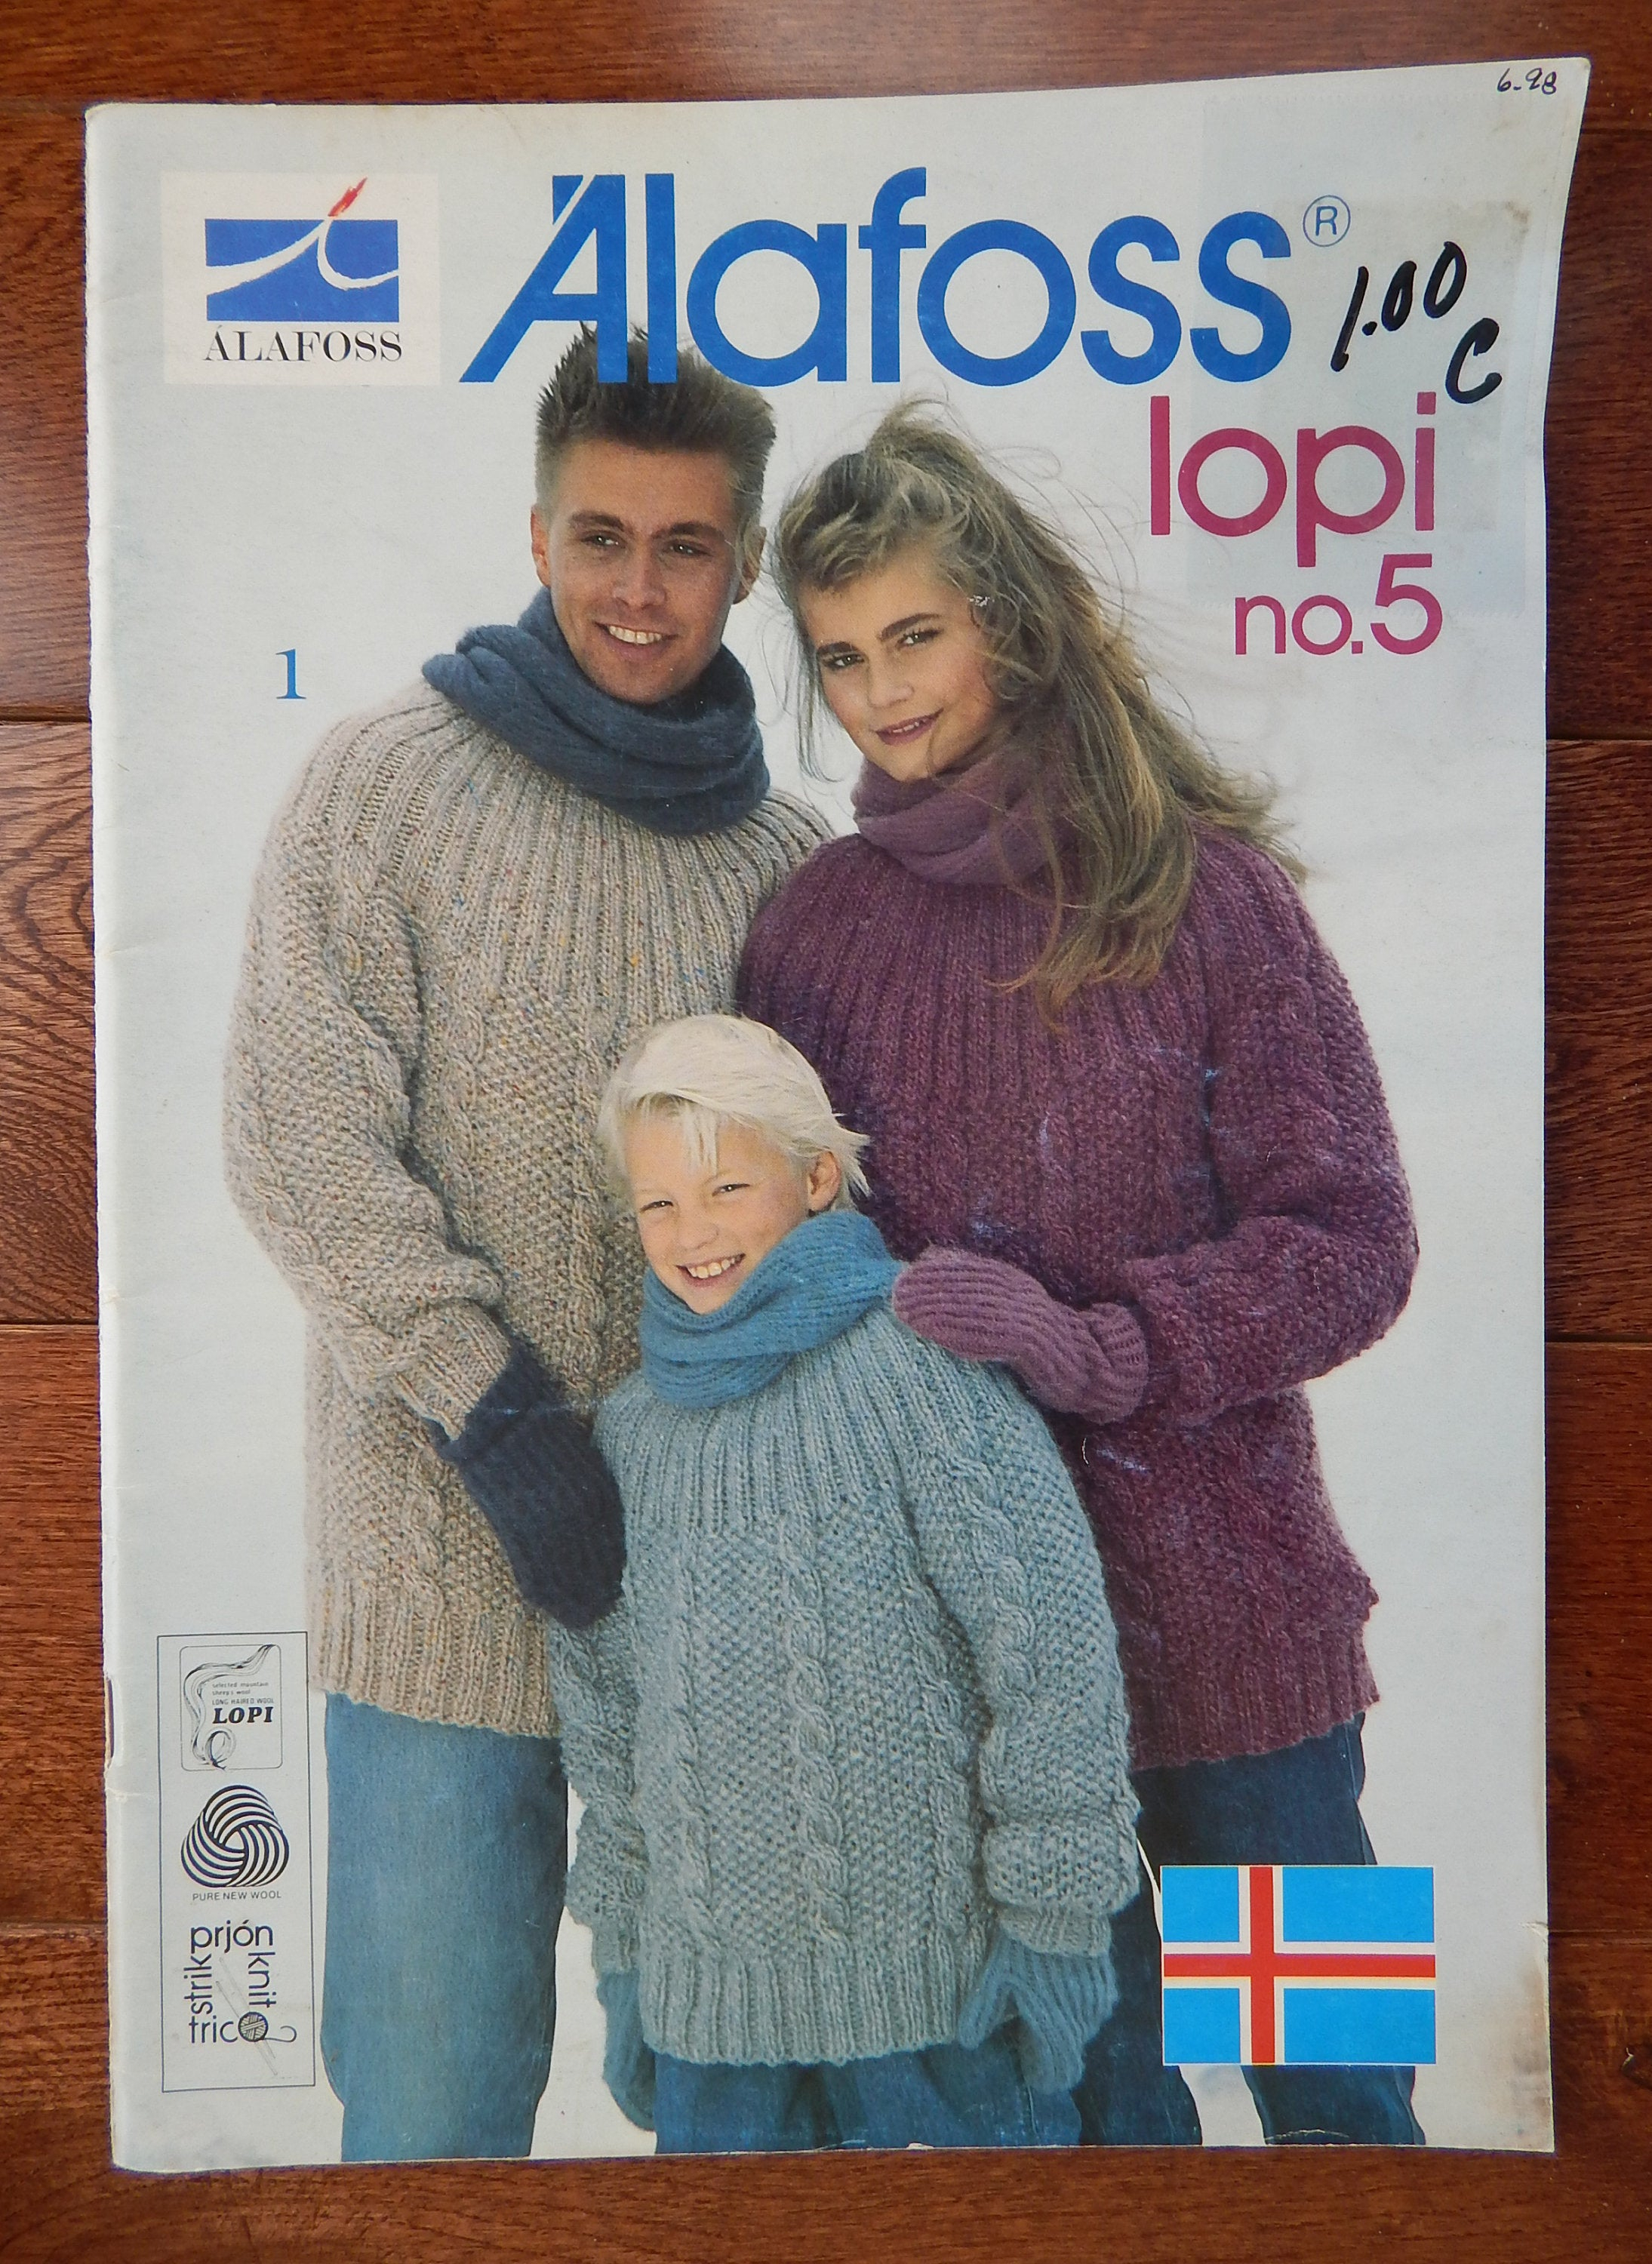 Free Lopi Knitting Patterns Alafoss Lopi No 5 Knitting Patterns Men Women Children Pullover Cardigan Sweater Vest Outerwear Sizes Vary Ski Fair Isles Cable